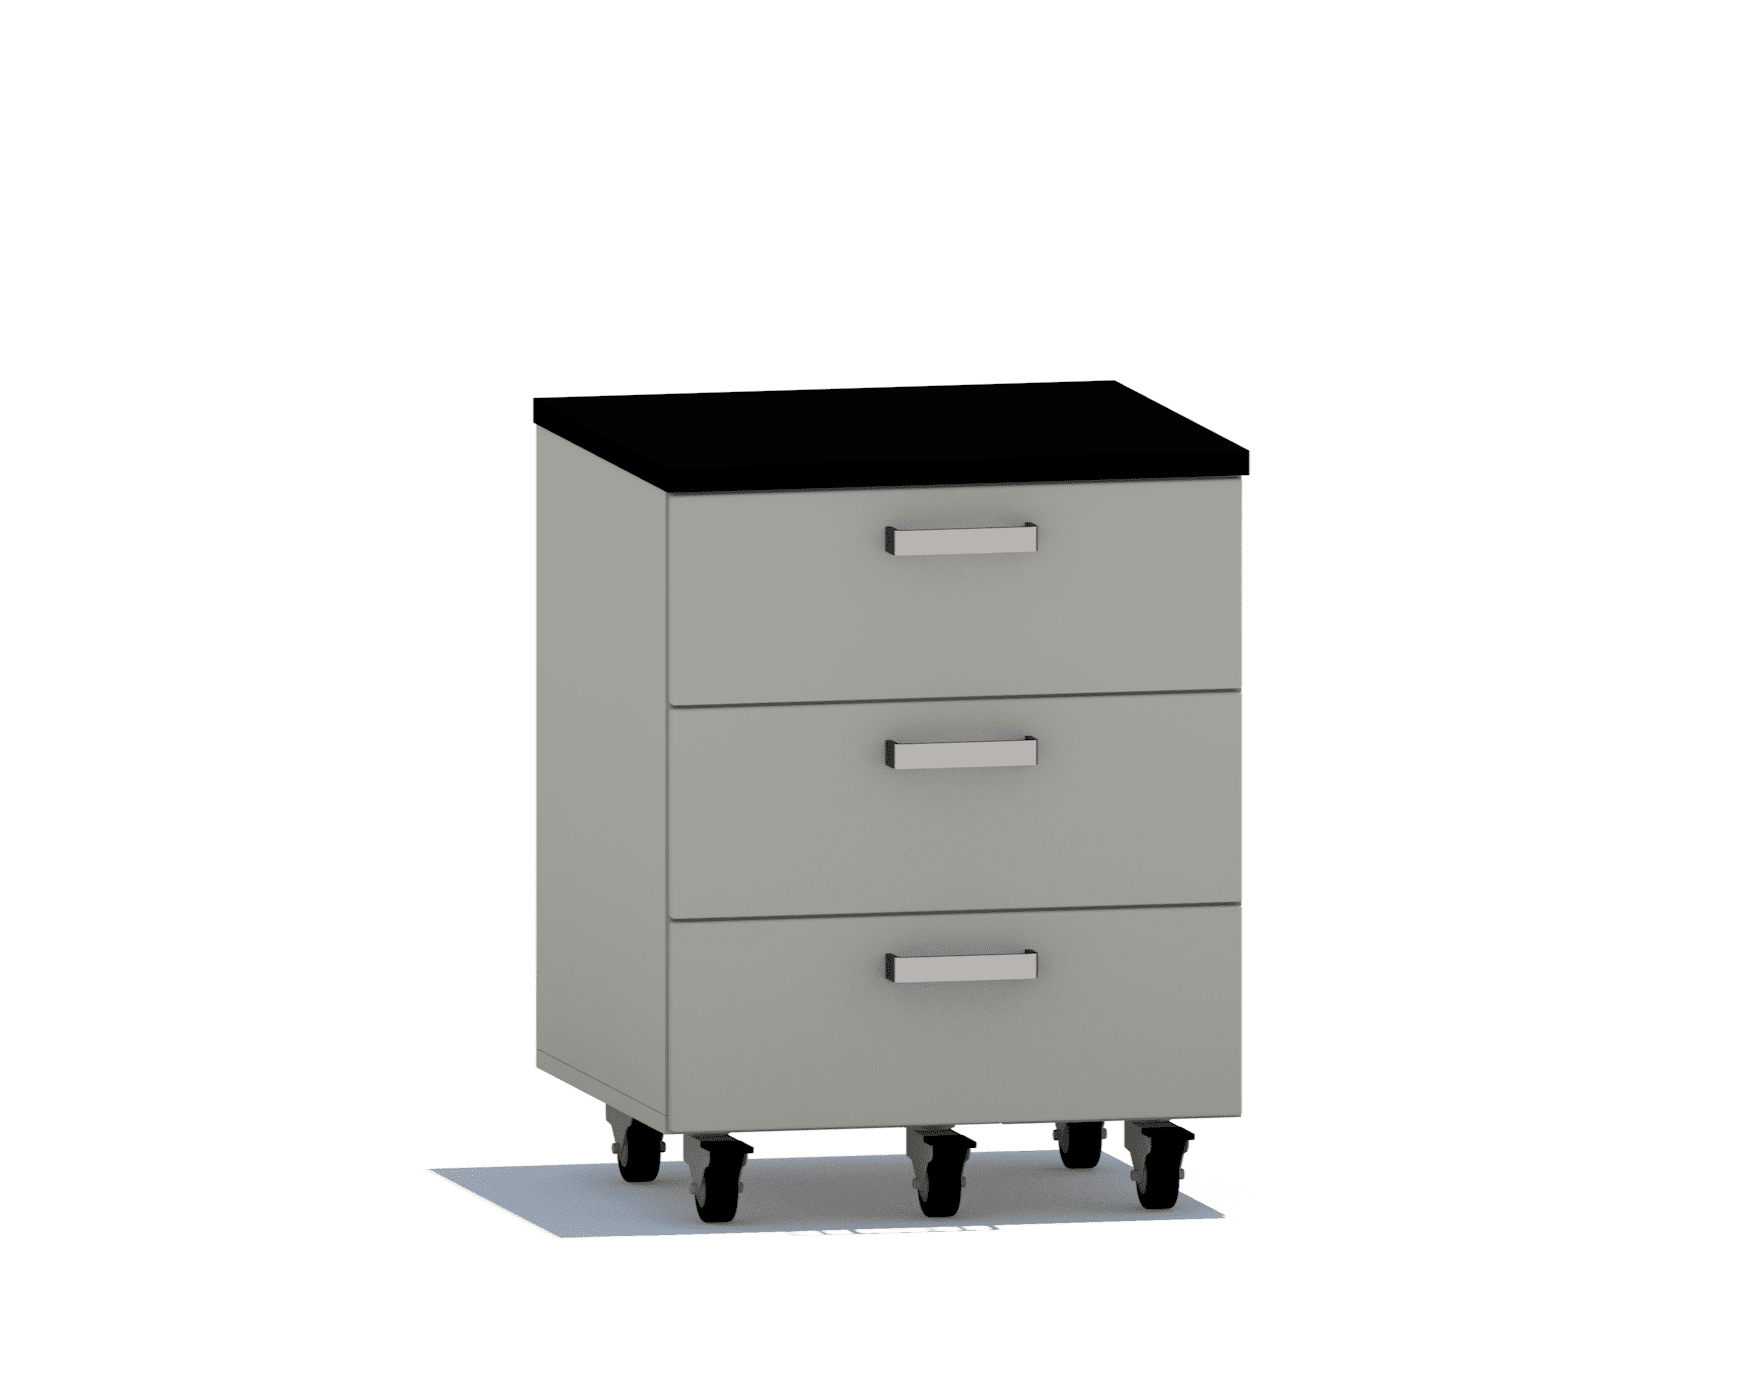 Drawer Storage Unit Workstations omnilabsolutions 24 wide Yes 